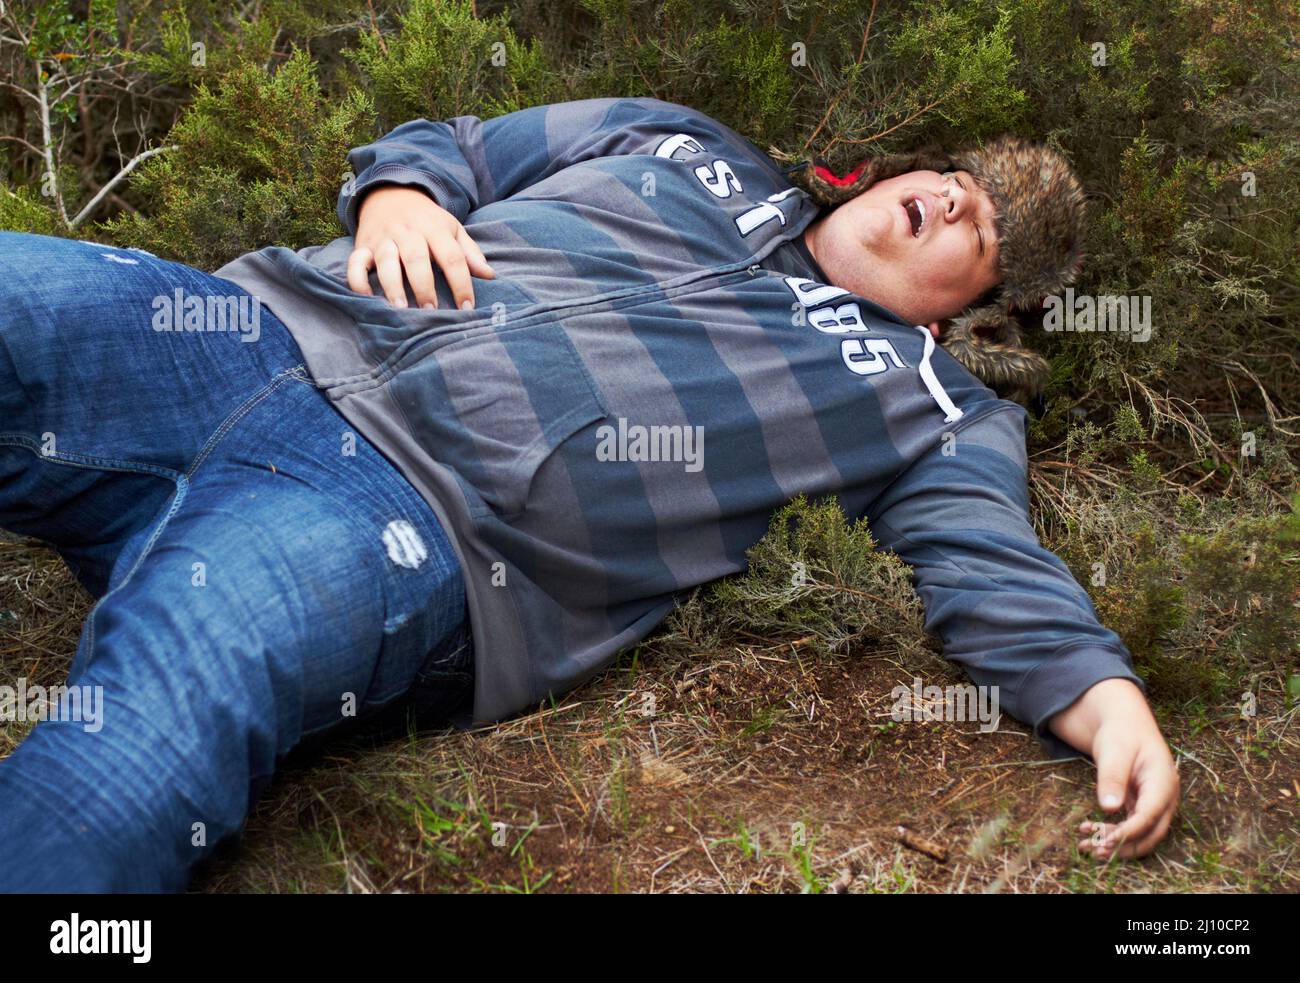 Suffering the consequences of a wild night.... An obese young man lying passed-out outside in the bushes. Stock Photo